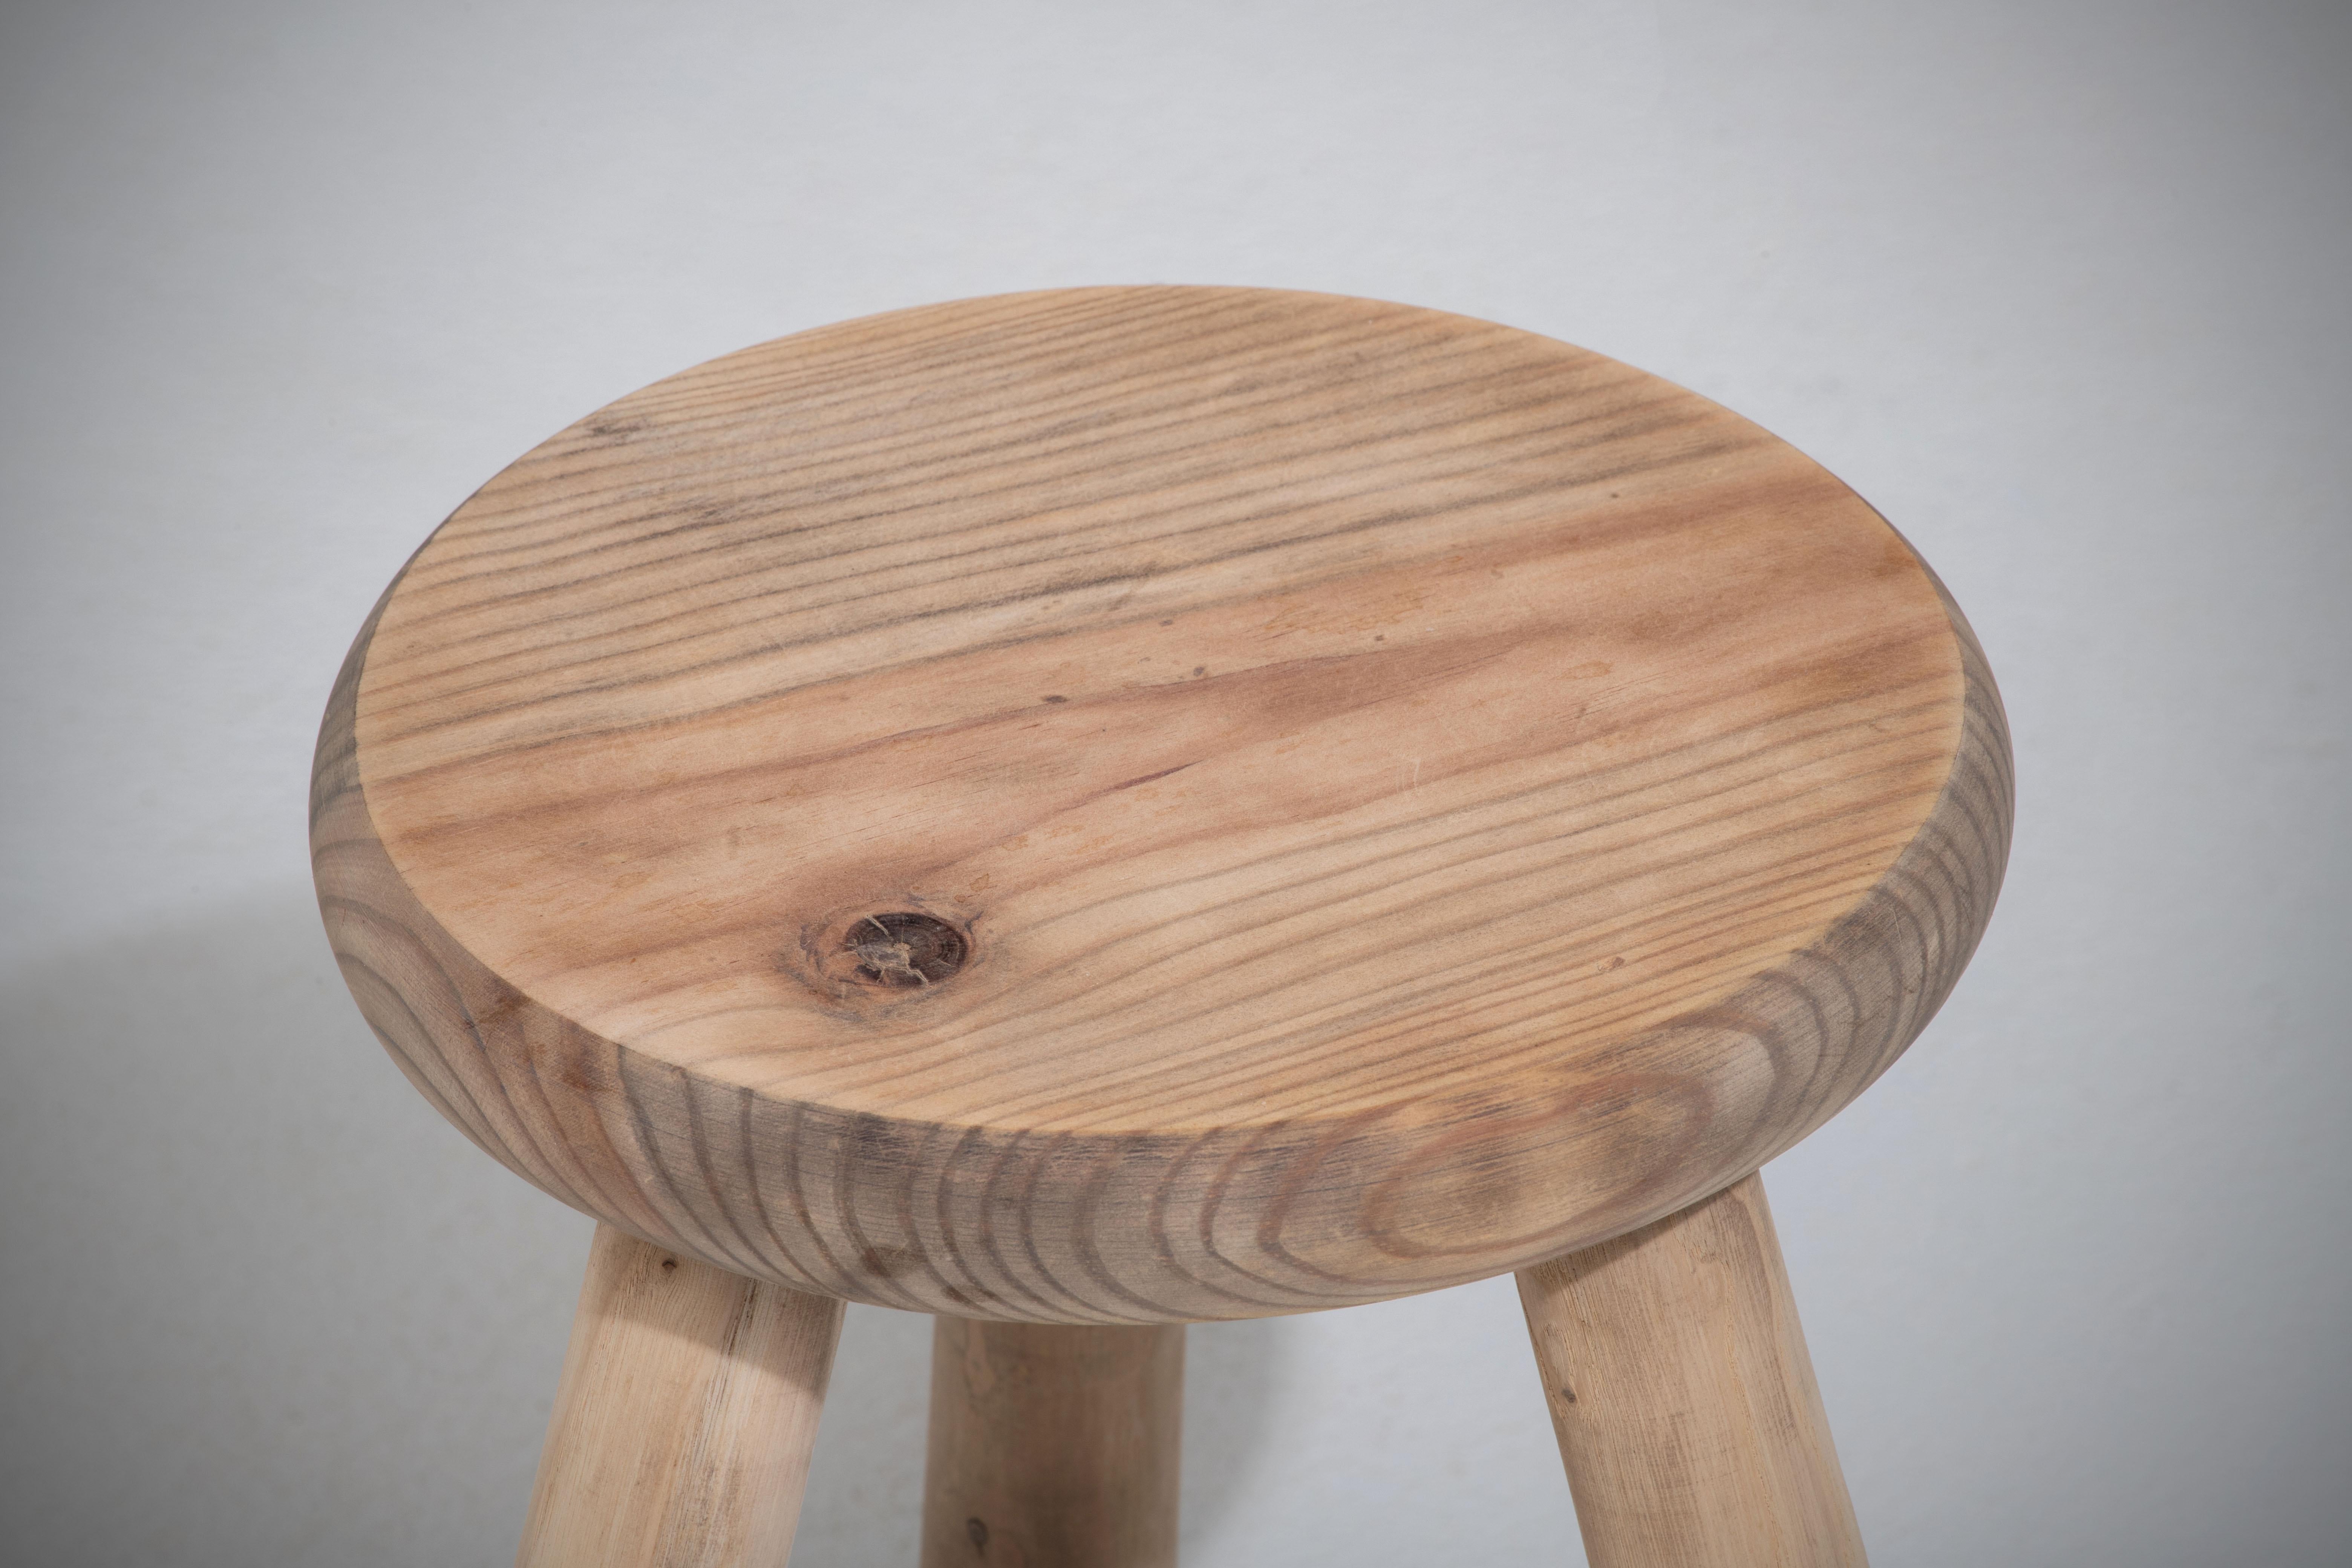 Hand-Carved Midcentury Pine Stool with Tapered Legs, 1960s, France For Sale